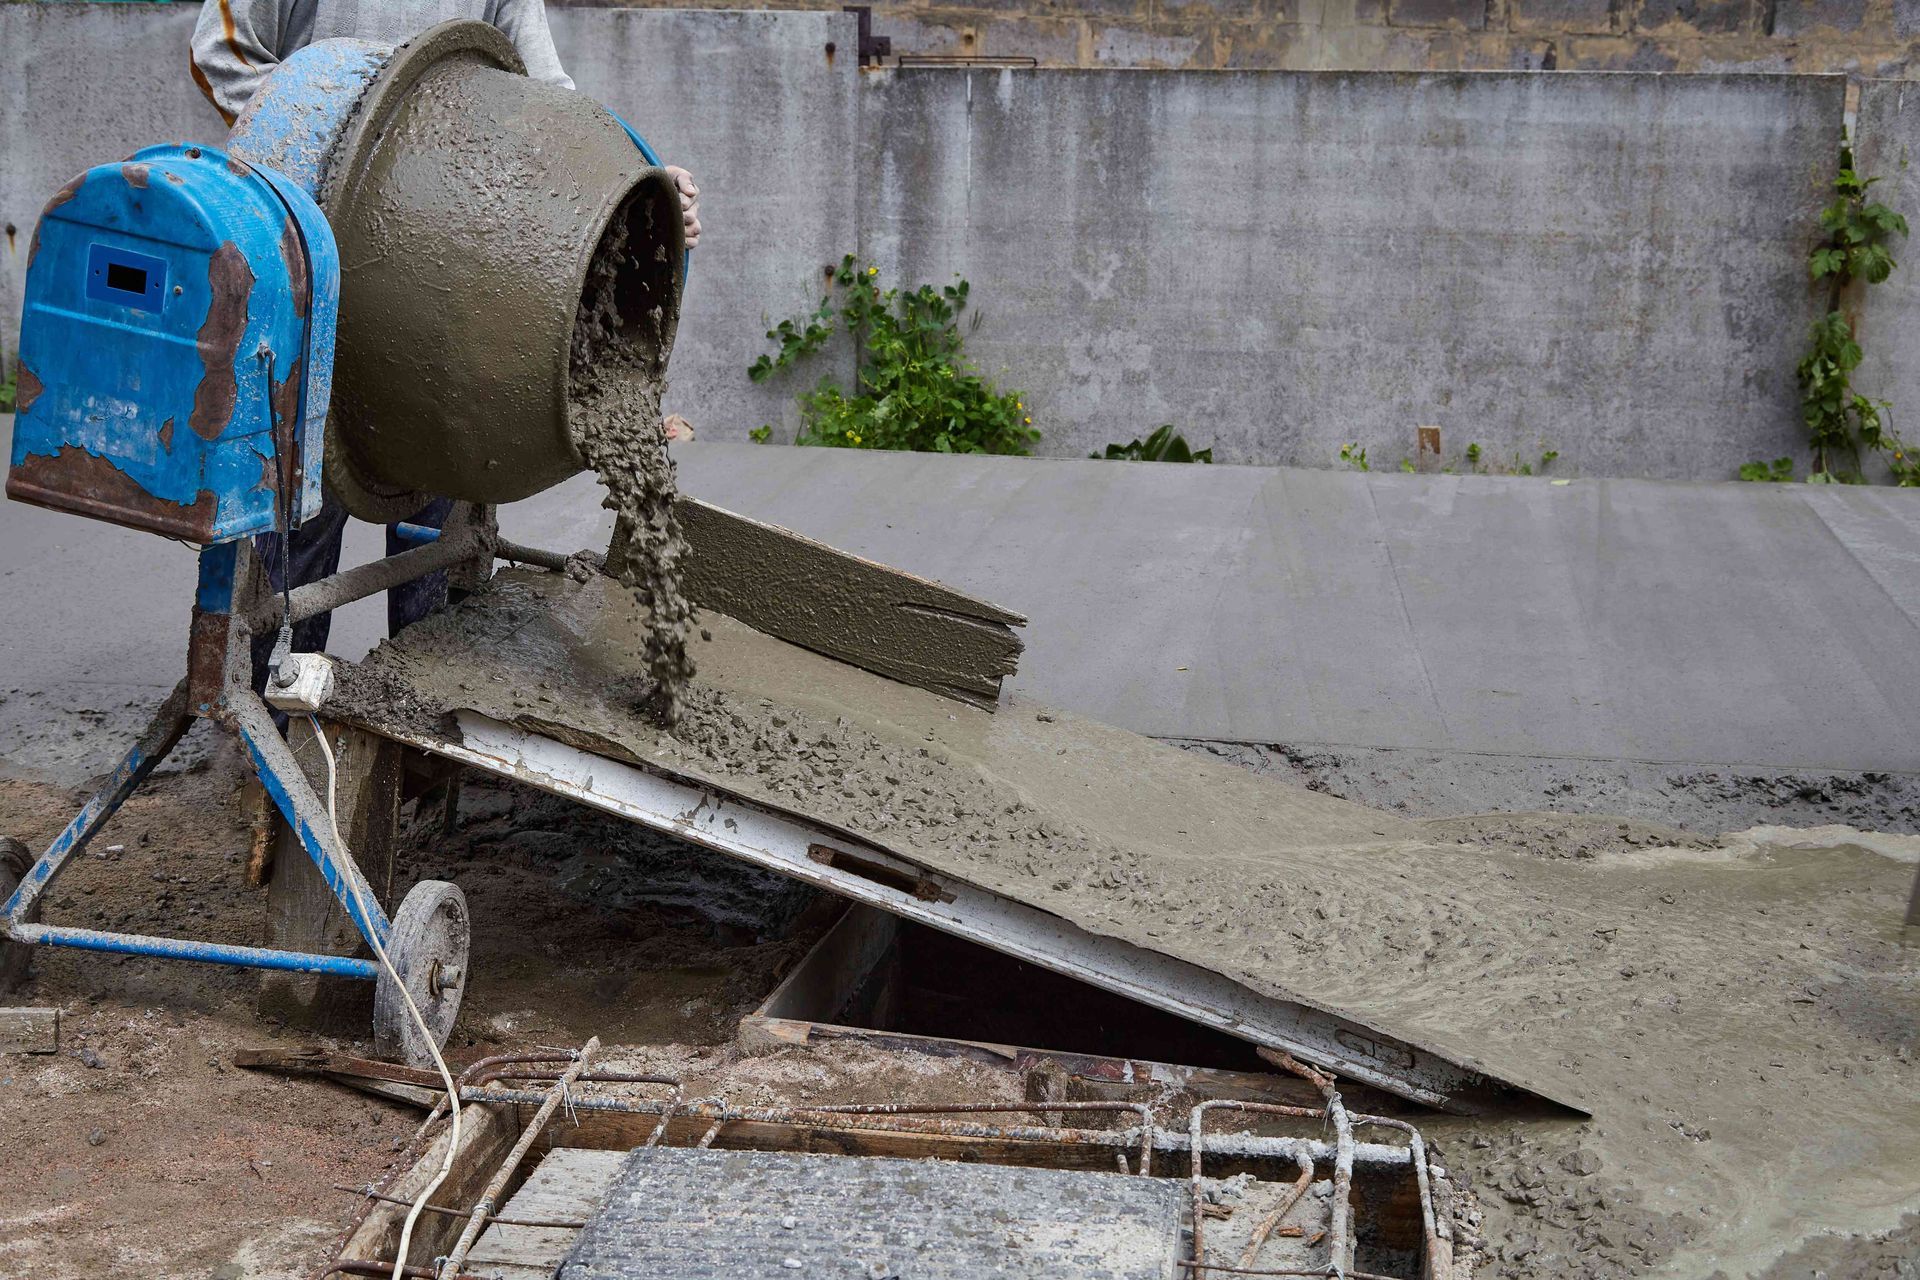 Concrete being poured out of mixer